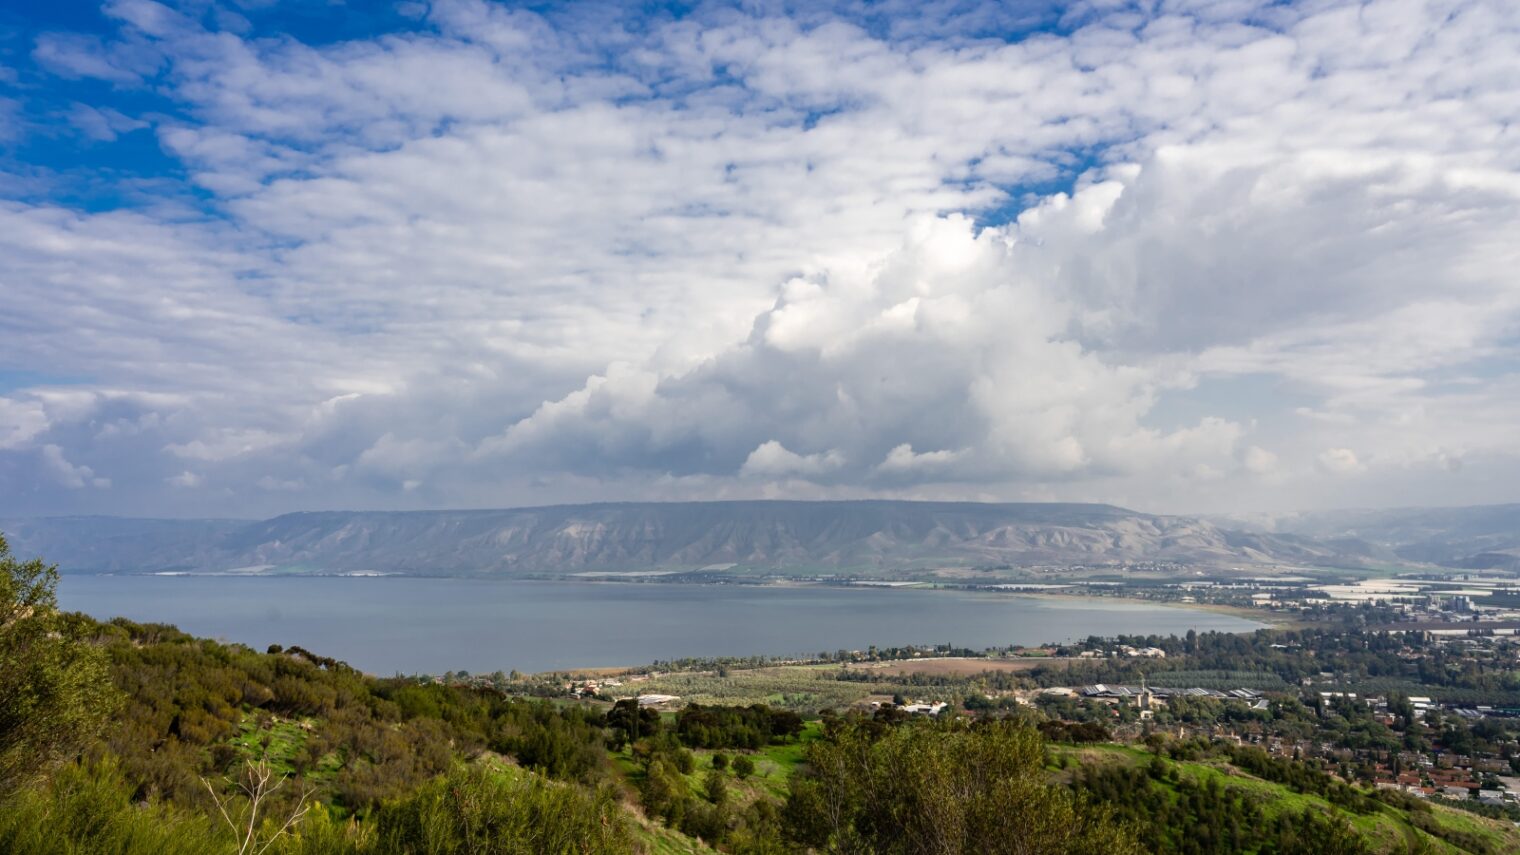 The water level in Lake Kinneret (Sea of Galilee) rose this winter to 14 centimeters from the maximum level. Photo by Alon Yasovsky